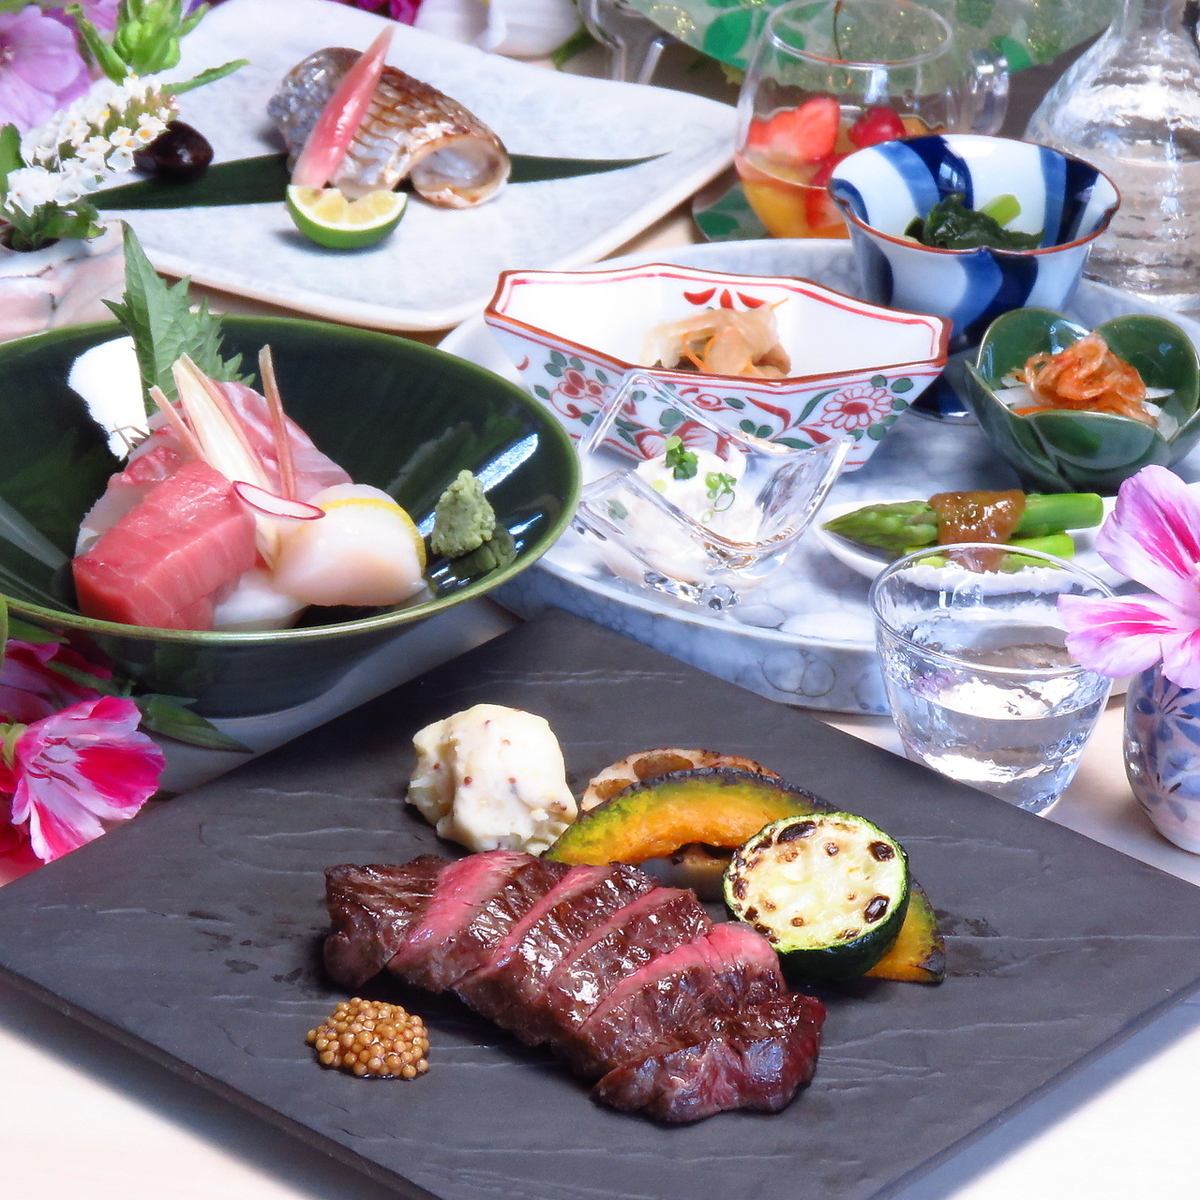 Exquisite Japanese cuisine prepared by the former head chef of Shinjuku Prince Hotel!